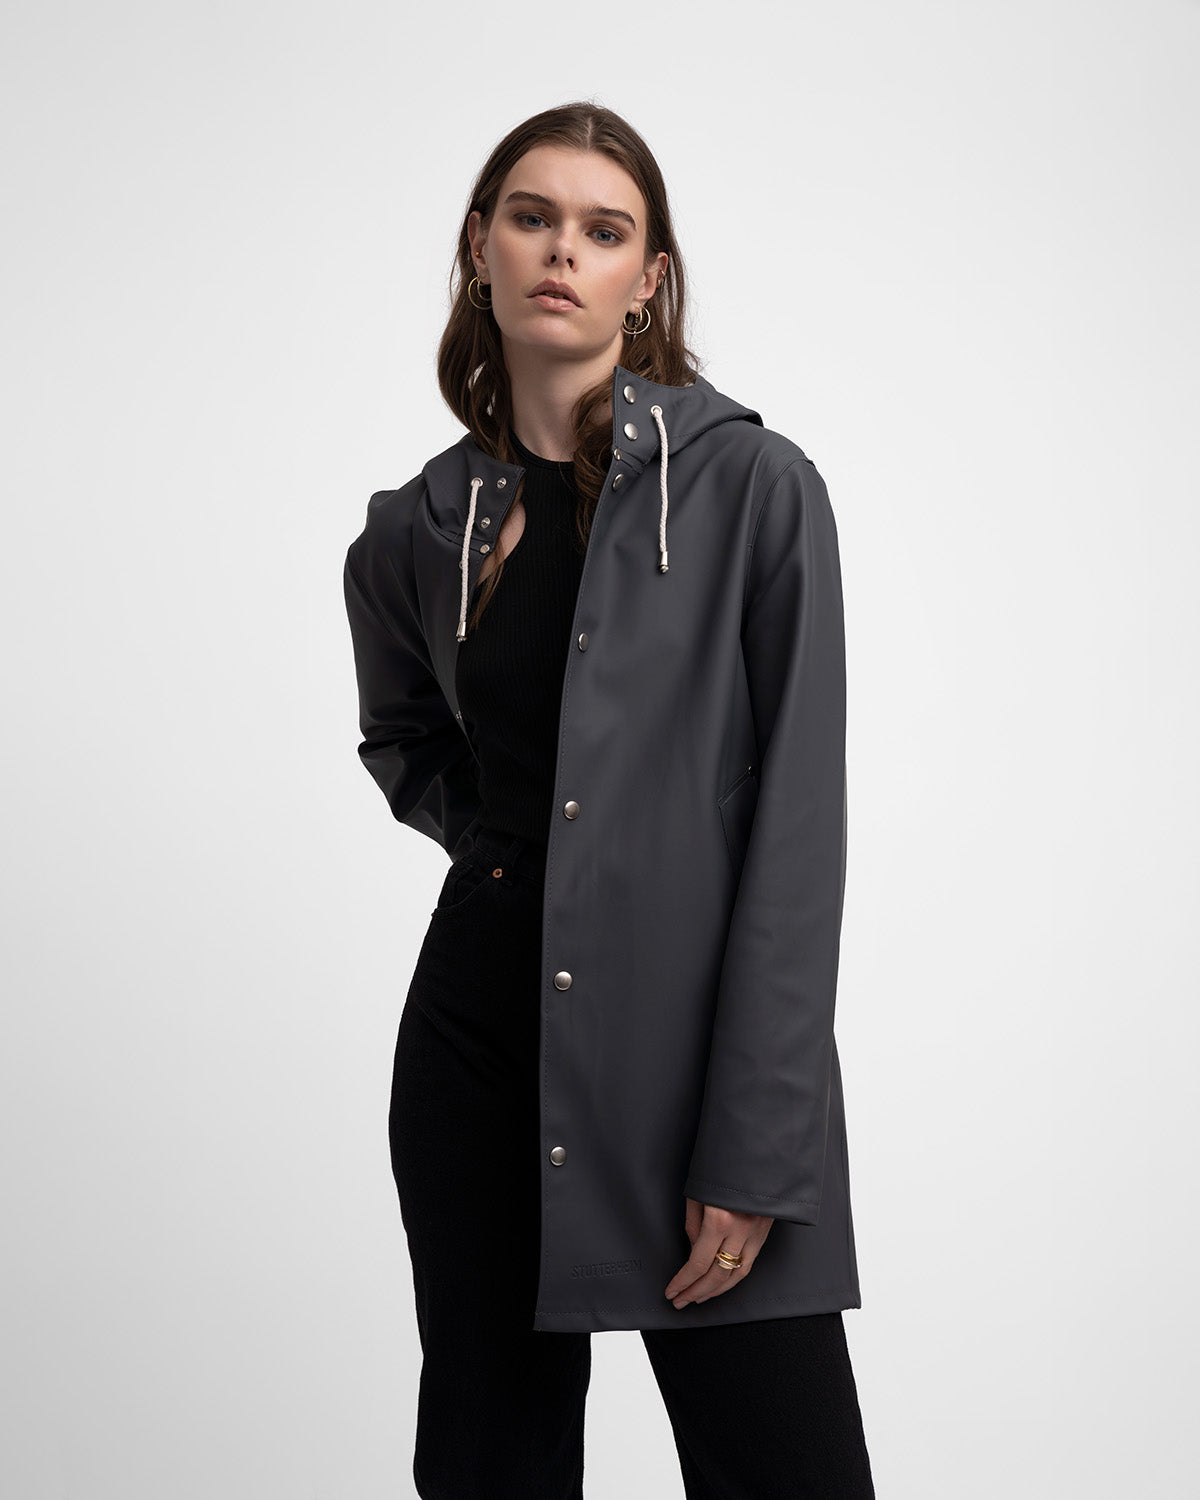 A woman with a Raincoat in color charcoal by Stutterheim